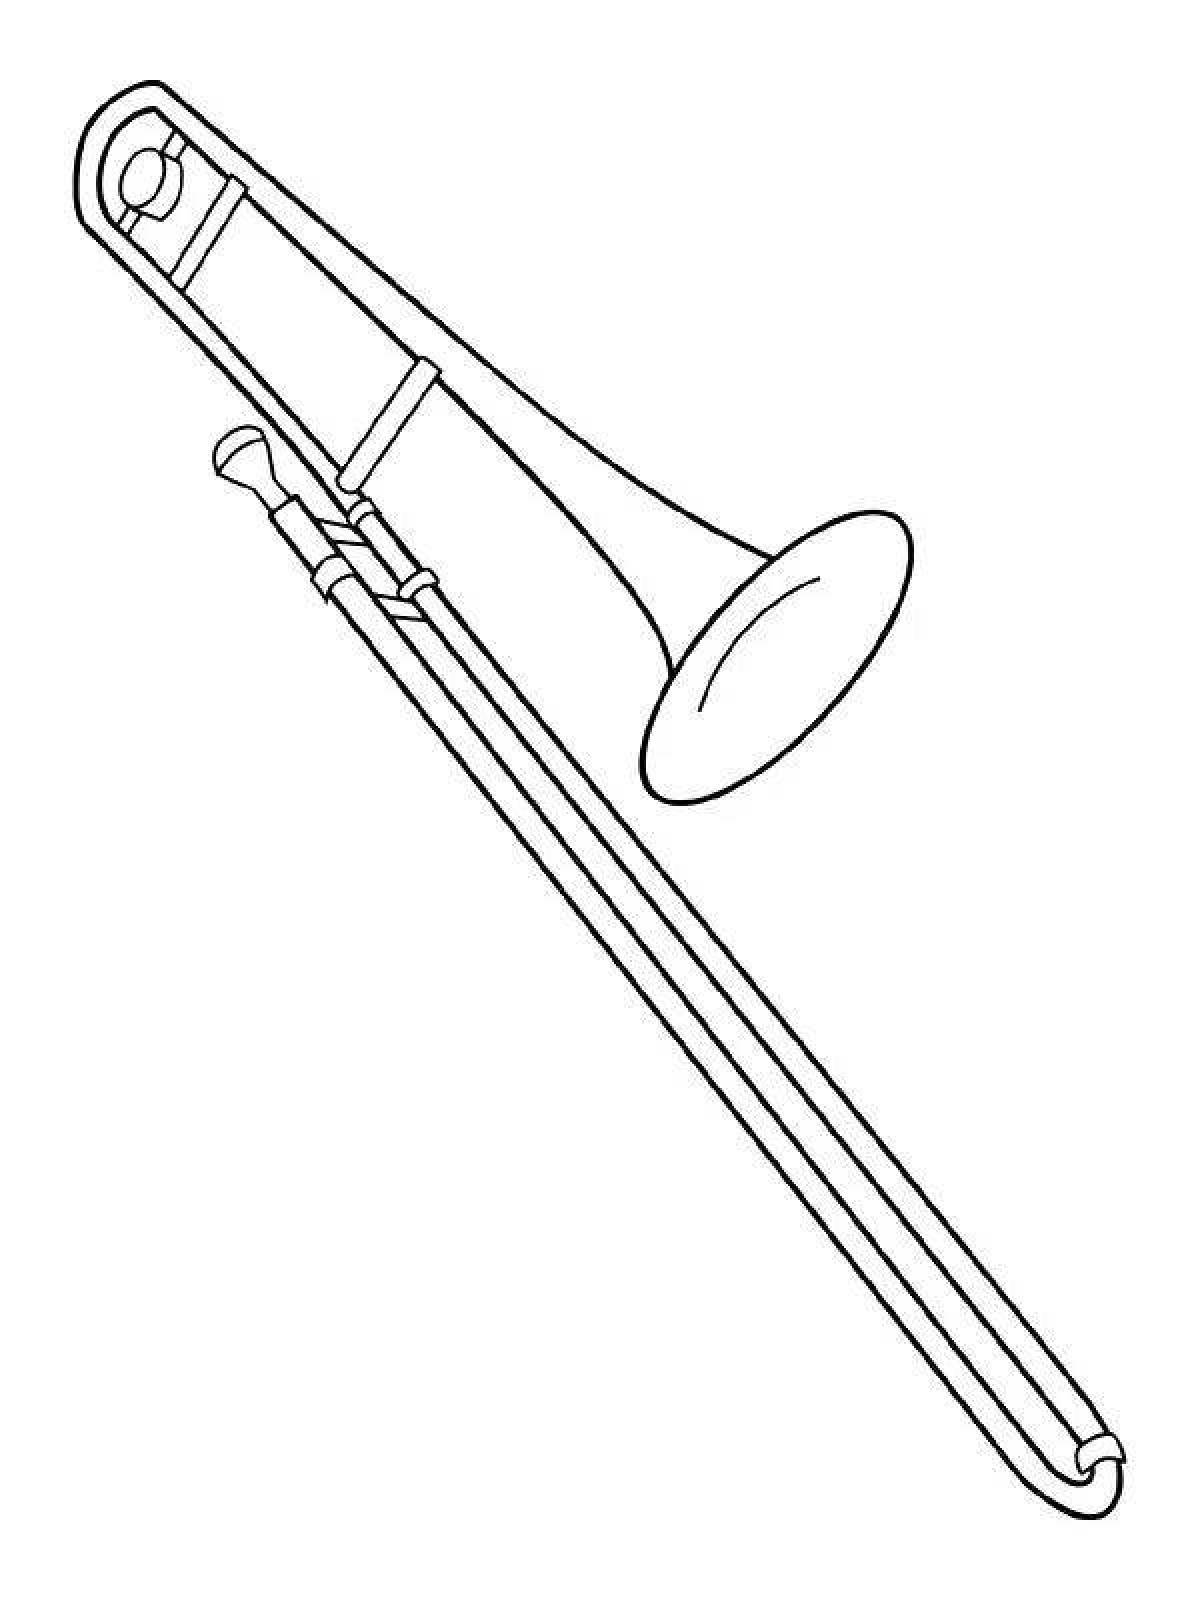 Creative musical instruments coloring pages for kids